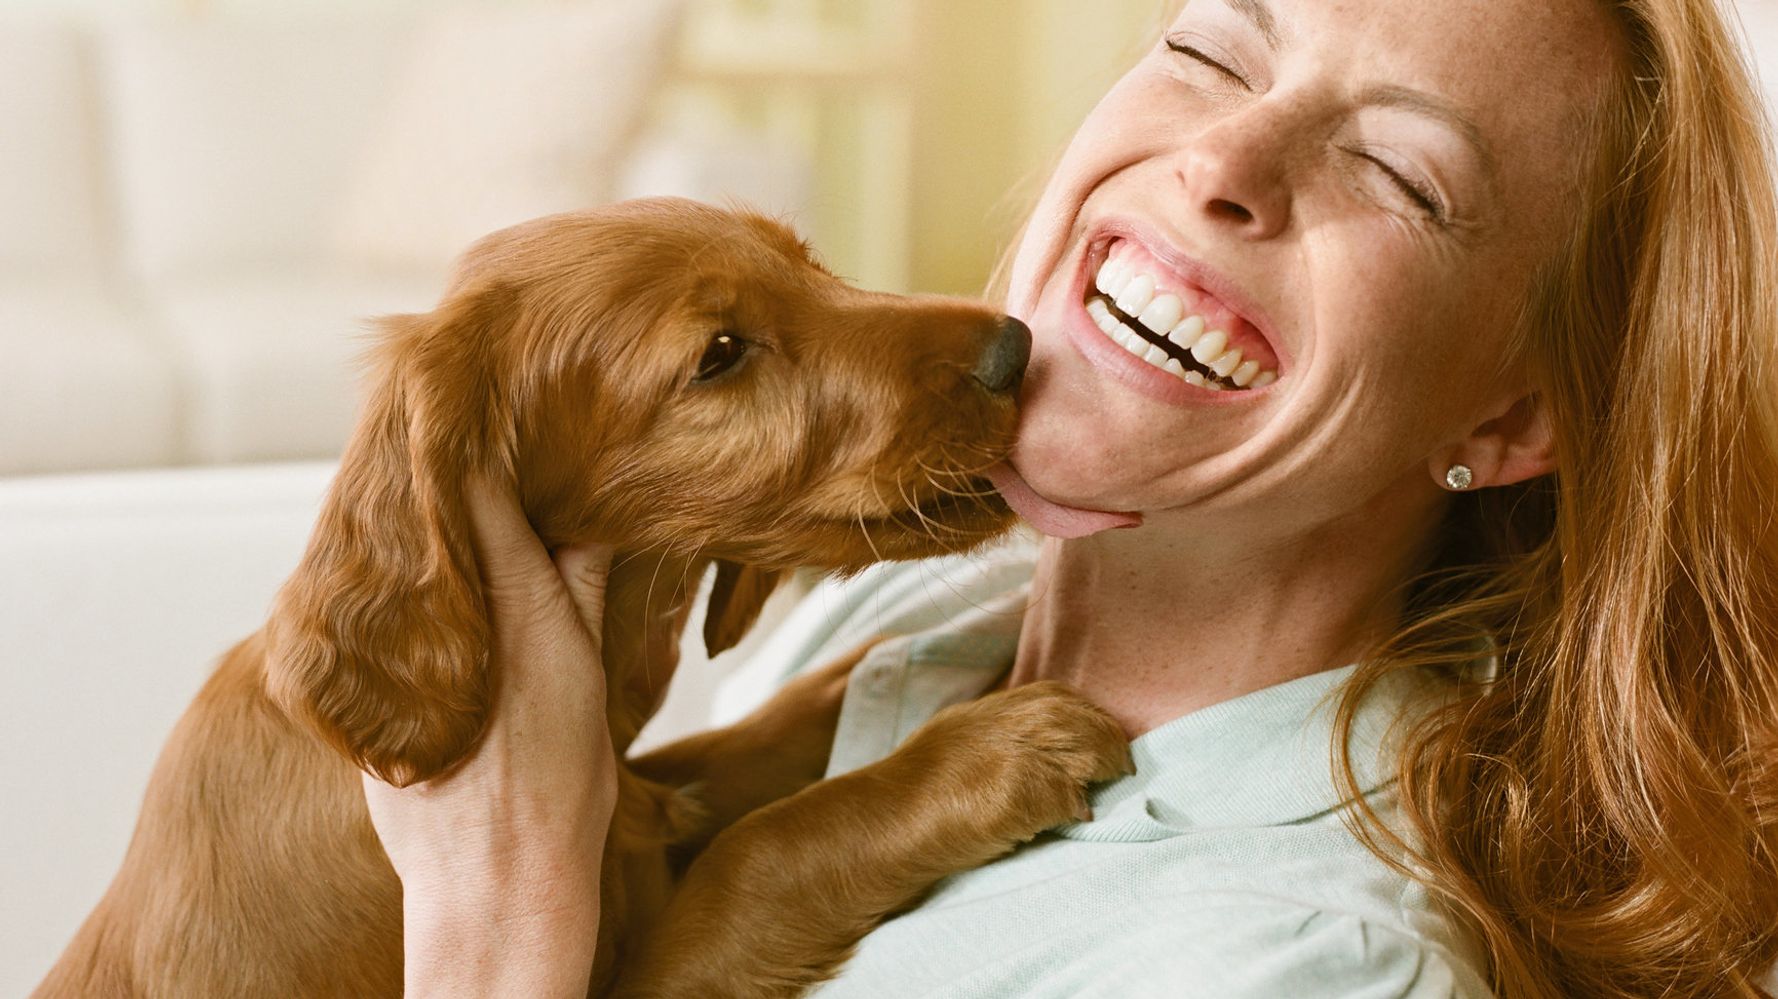 Letting Your Dog Lick Your Face Could Harm Your Health, Experts Warn | HuffPost UK Life